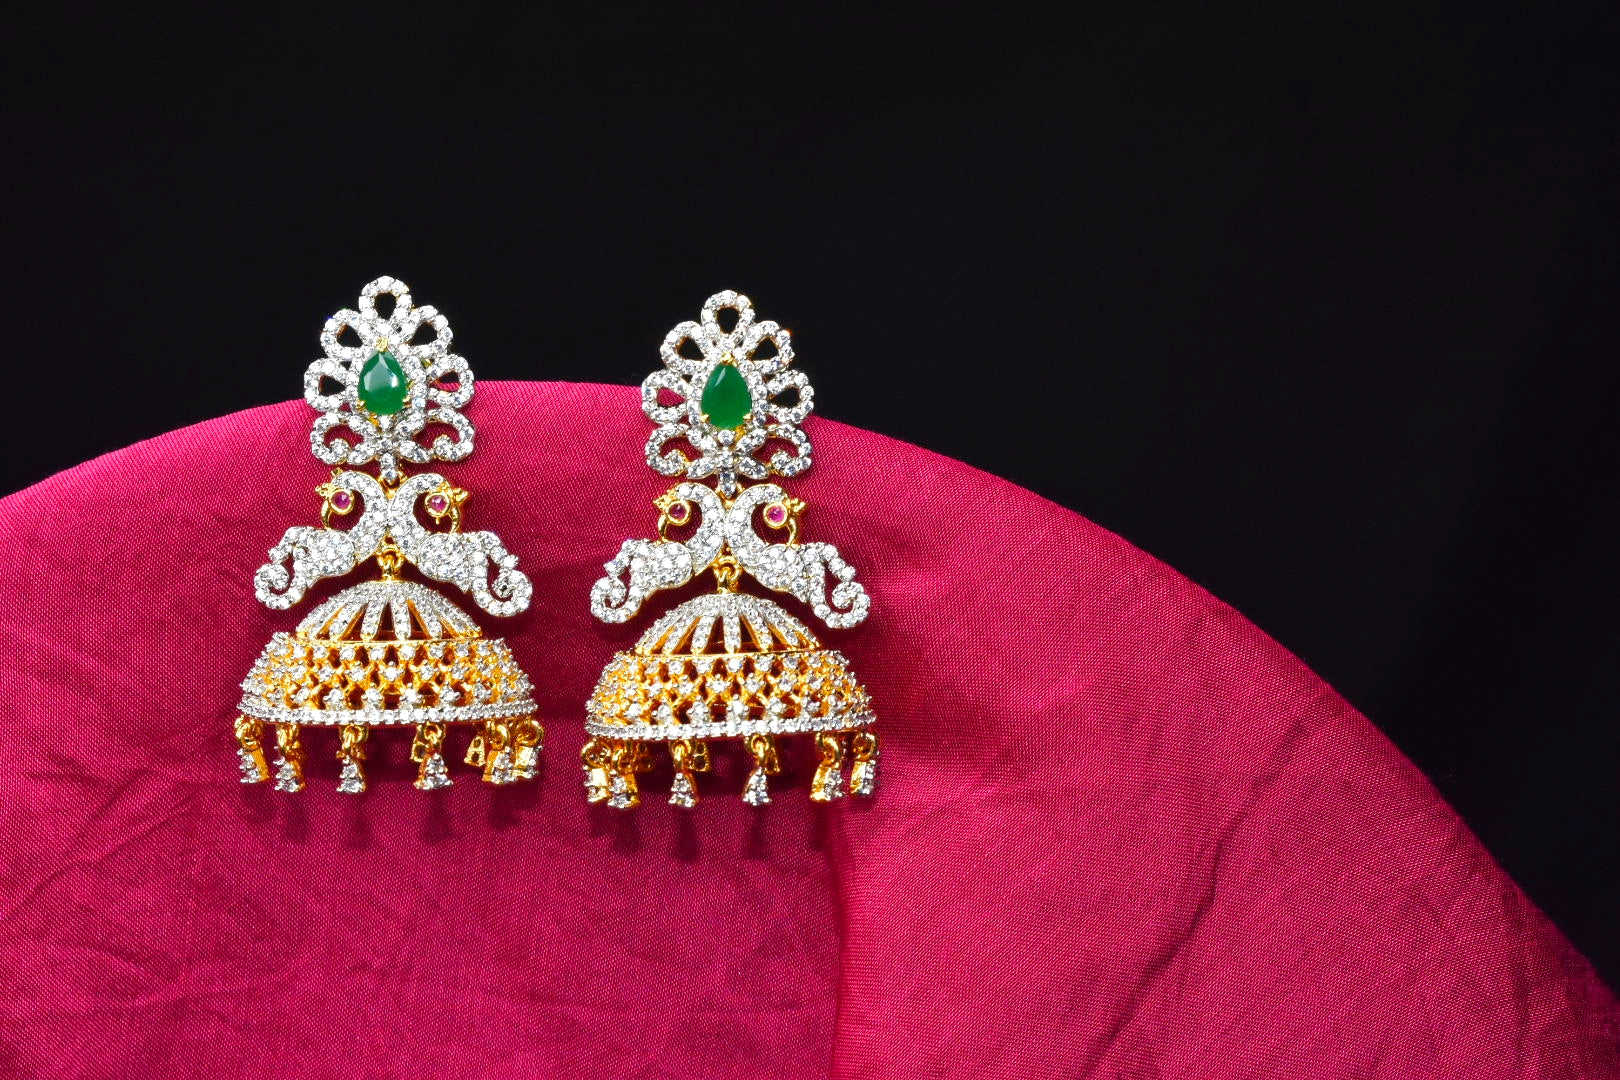 Buy Rose Gold Cz Stones Diamond Jhumka Earrings With Tikka,indian  Jewelry,statement Earrings,statement Jewelry,diamond Earrings, Indian  Earrings Online in India - Etsy